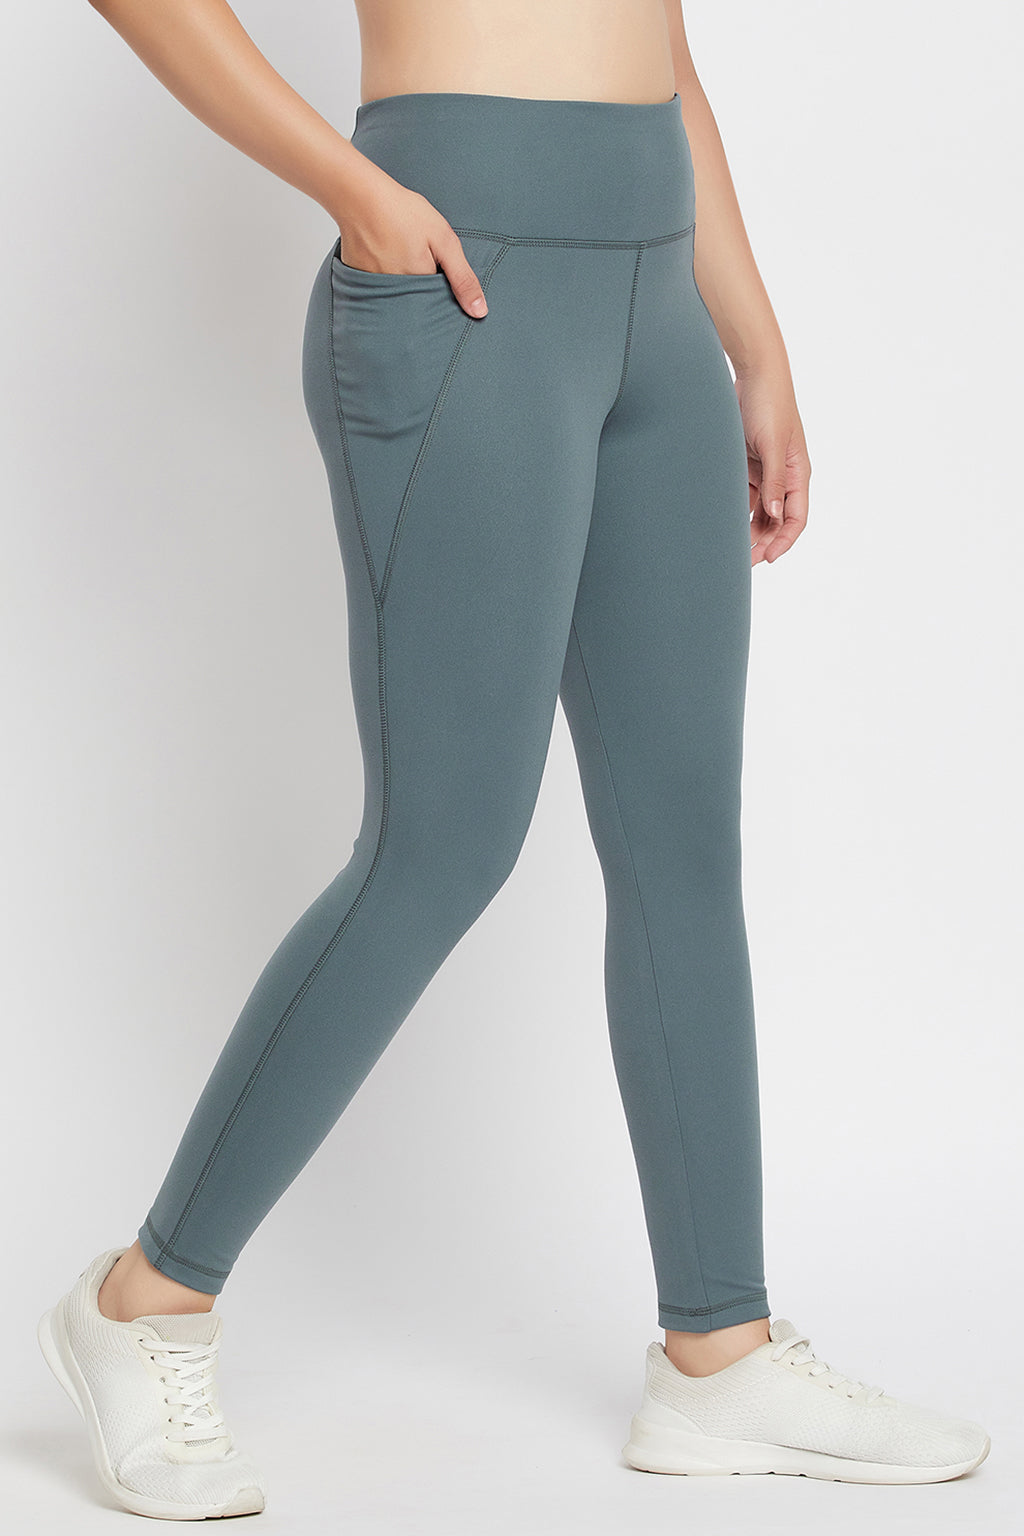 High-Waisted CozeCore Side-Pocket Leggings for Women | Old Navy